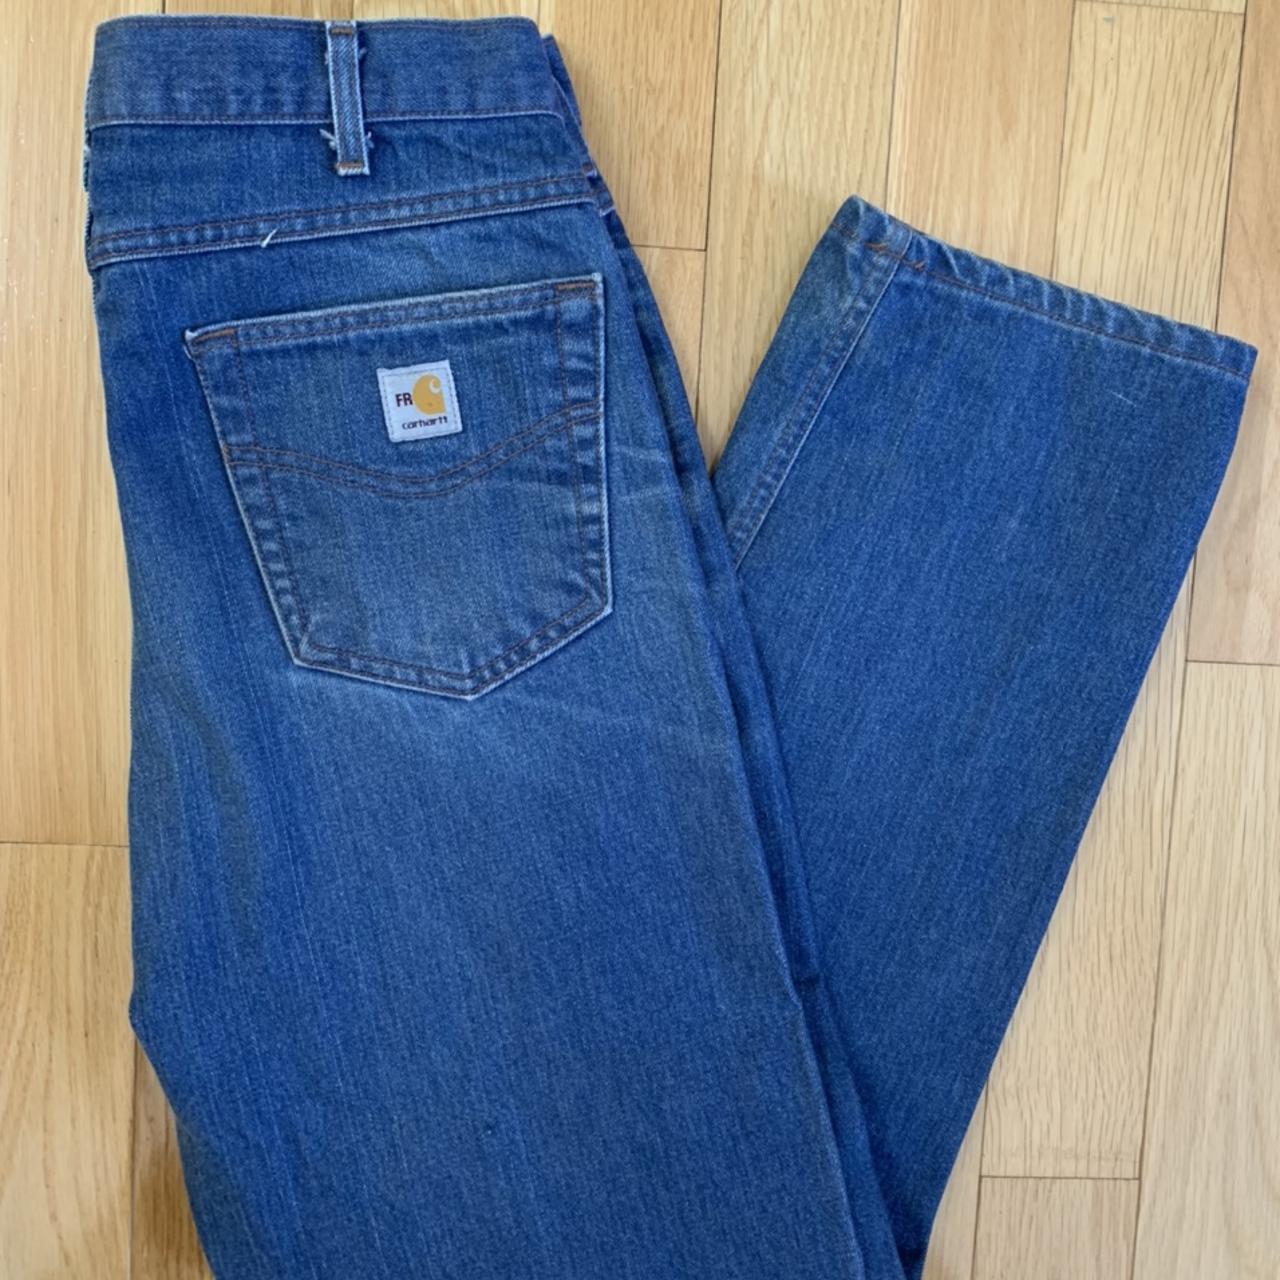 Vintage Carhartt FR blue jeans with some wear to... - Depop